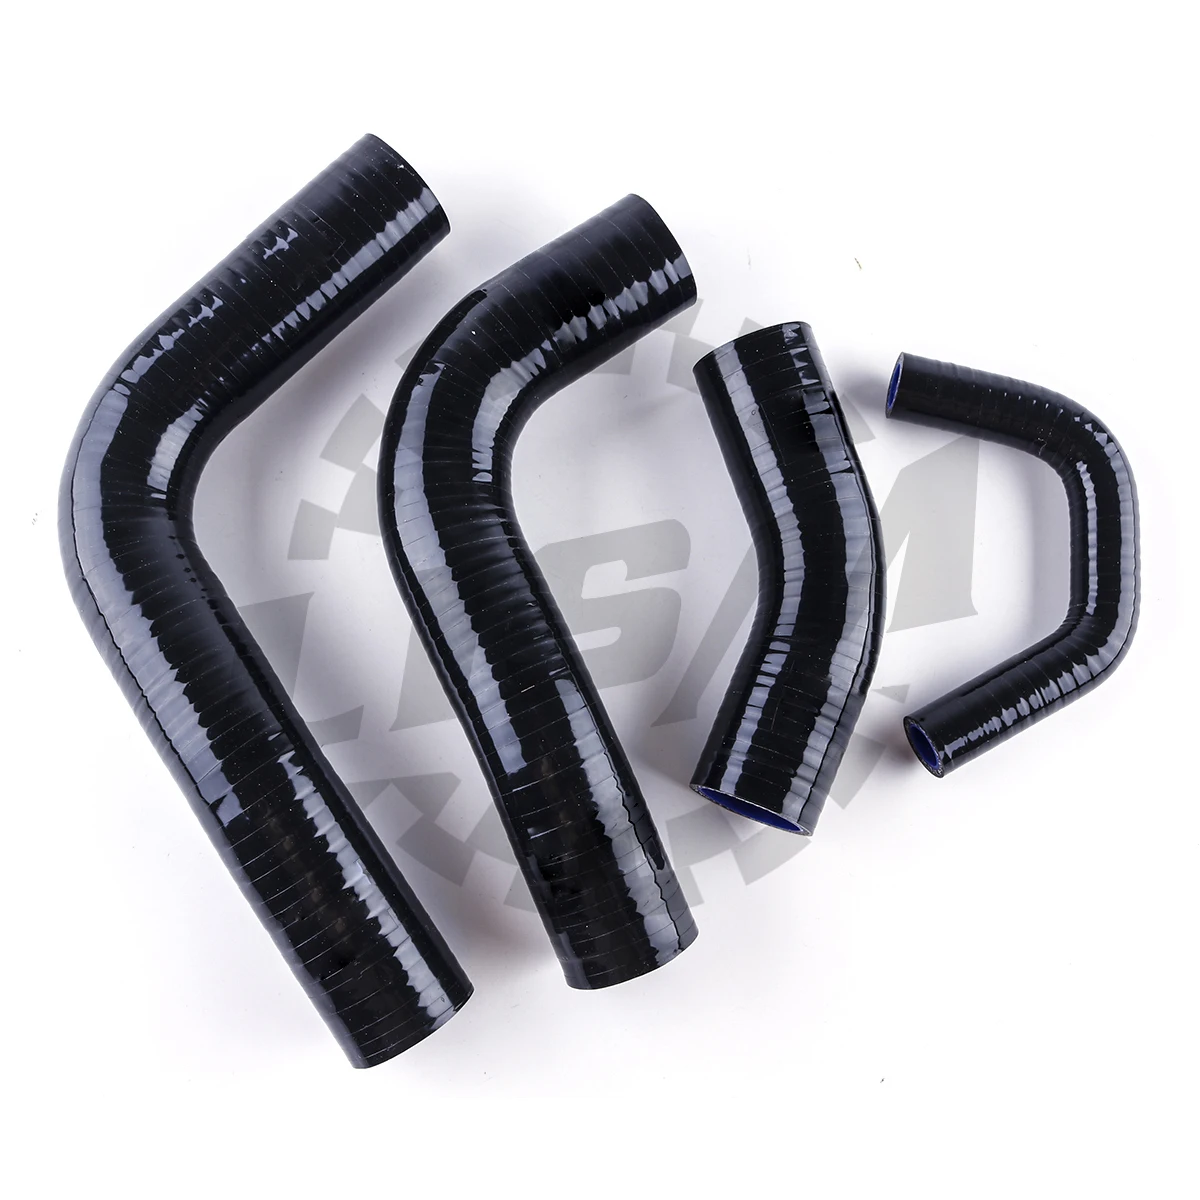 

4PCS For Toyota Landcruiser 80 Series FJ80 3F 4.0L 1990-1992 1991 3-PLY Car Silicone Radiator Hose Upper and Lower